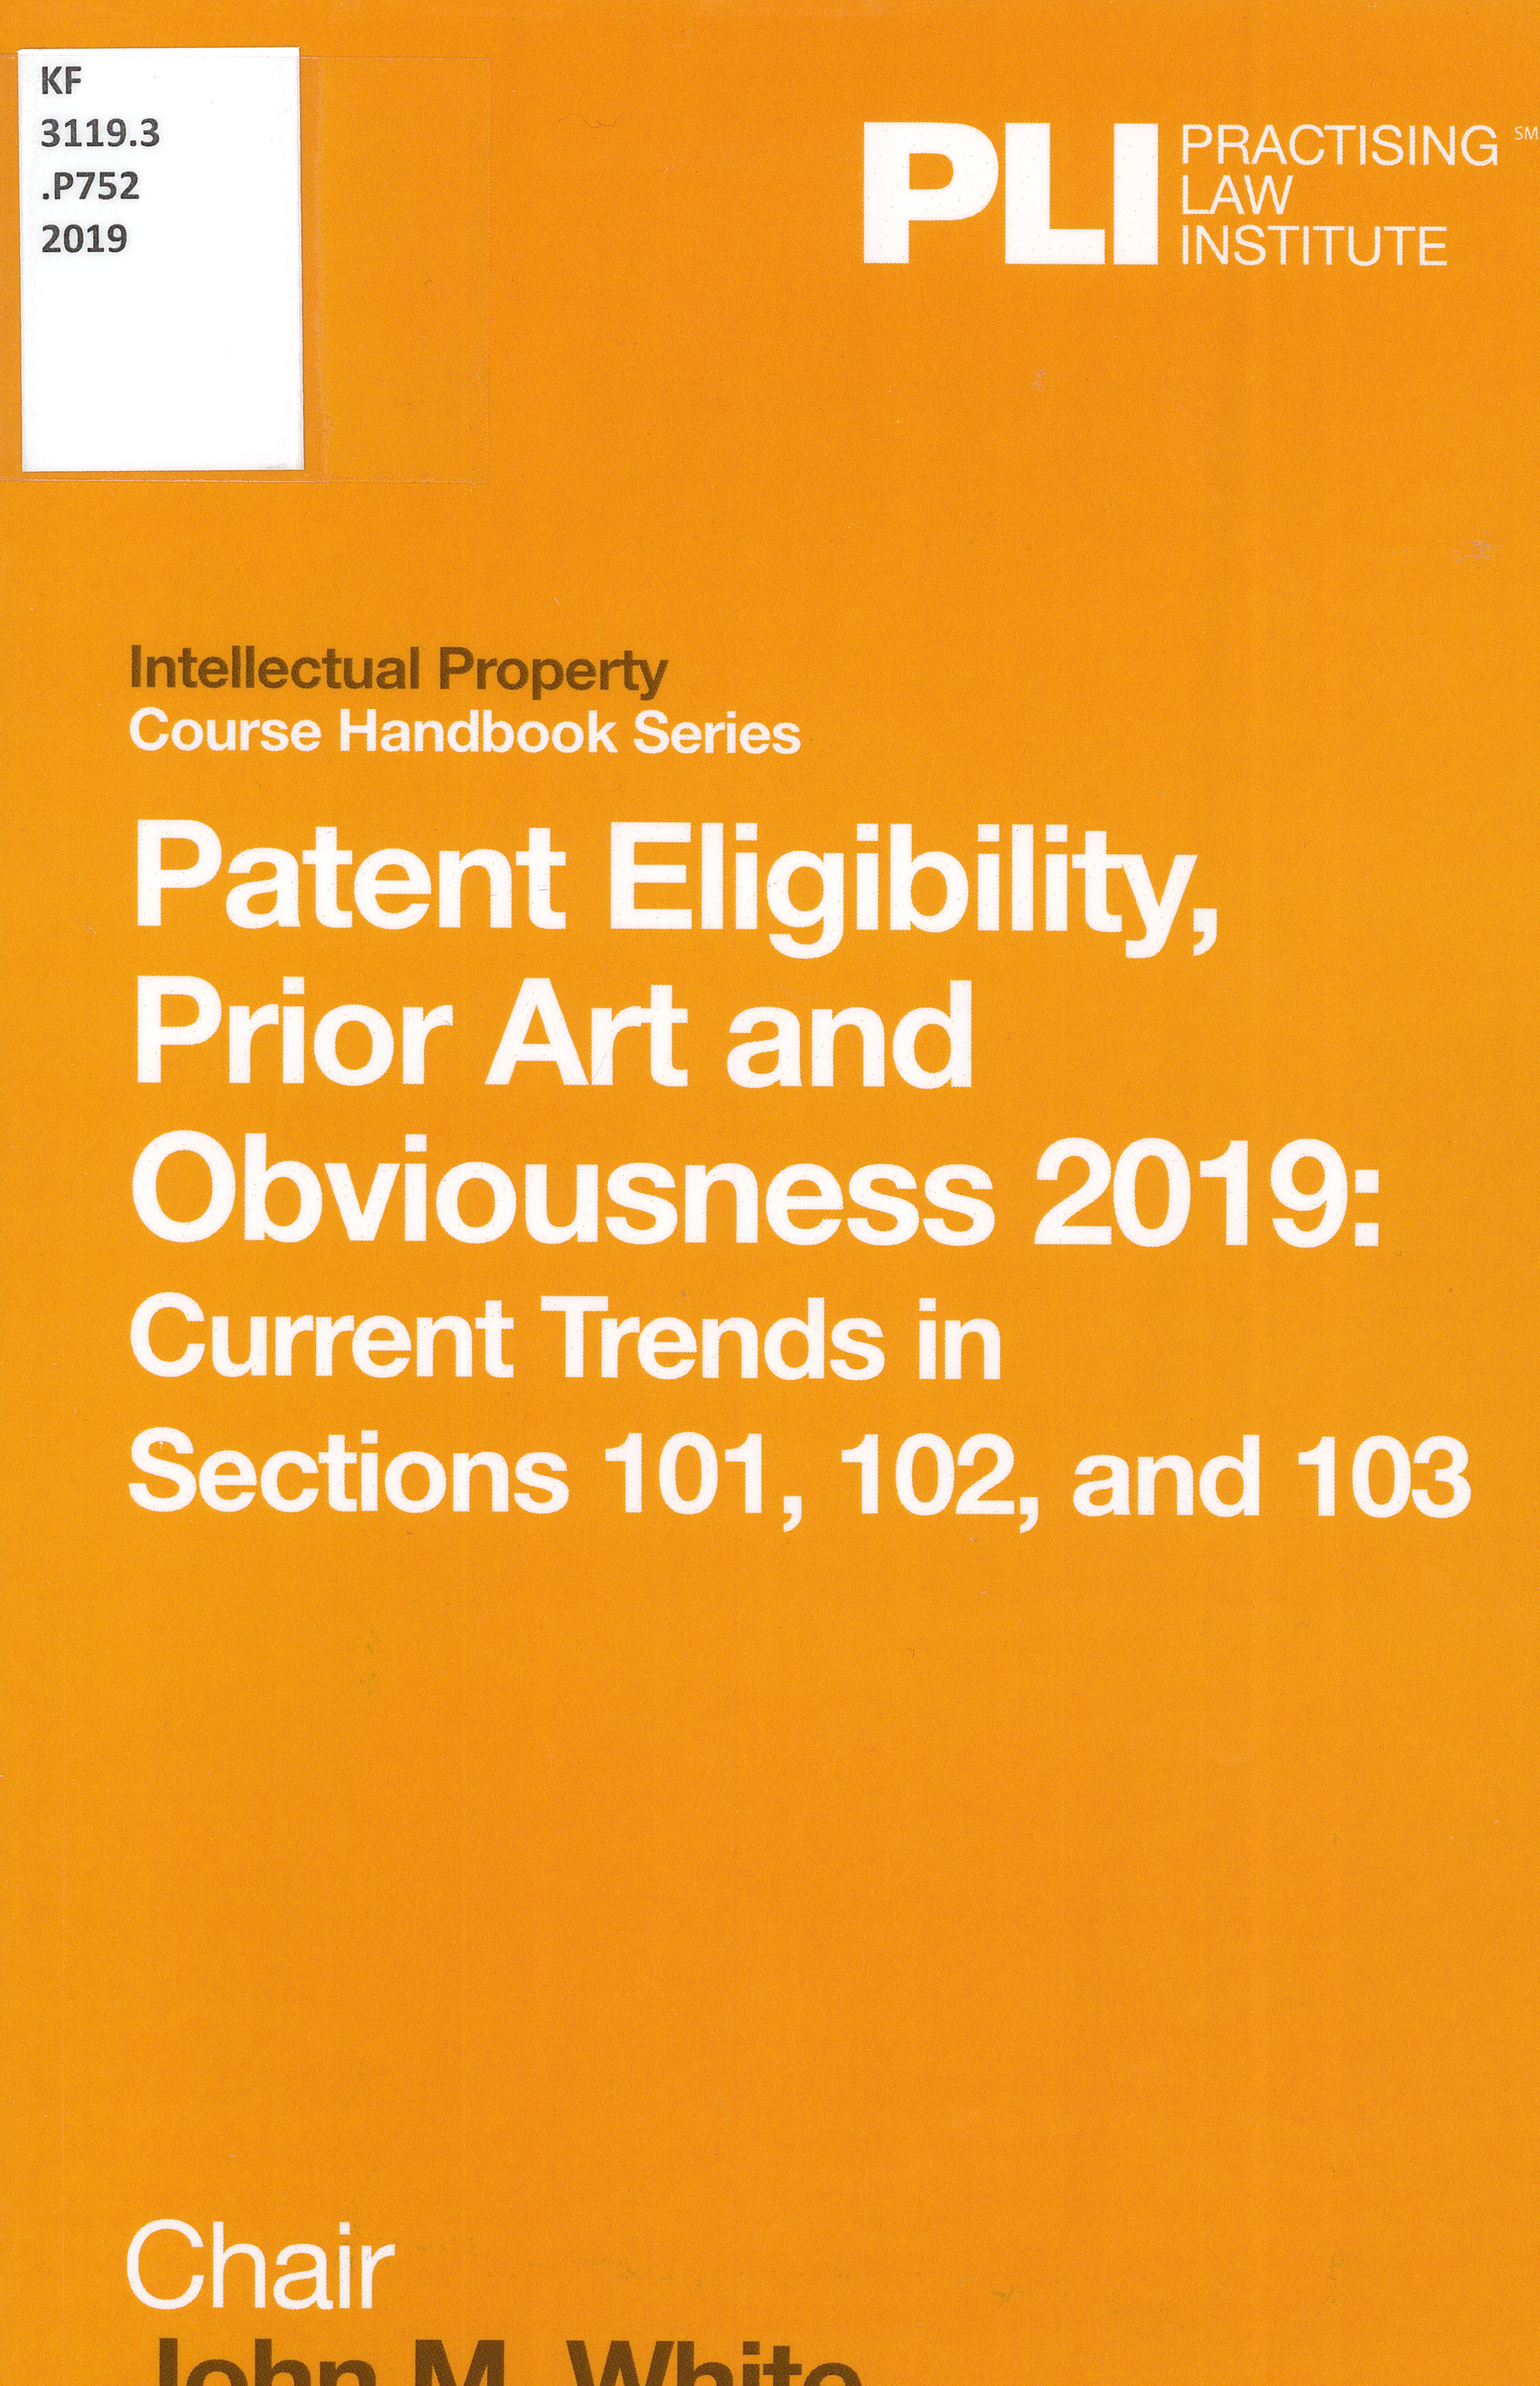 Patent eligibility, prior art and obviousness 2019 cover